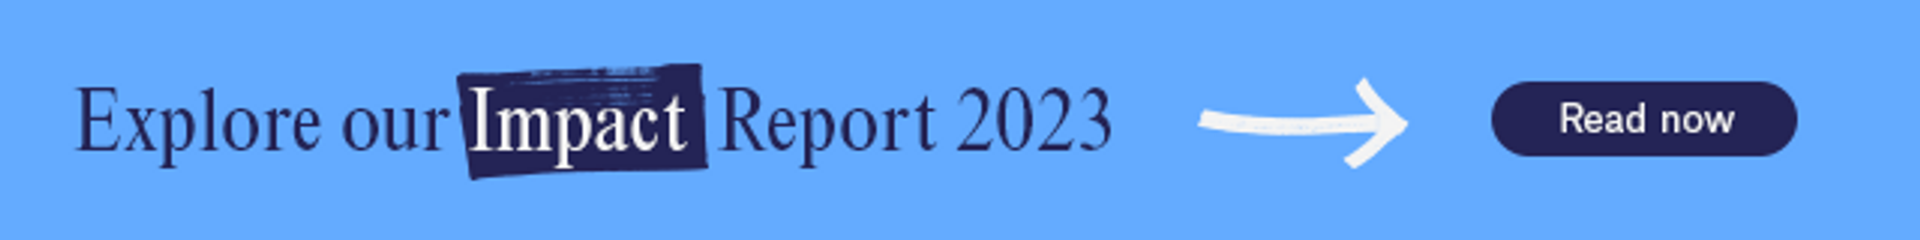 Text: "Explore our Impact Report 2023", with a "Read Now" button